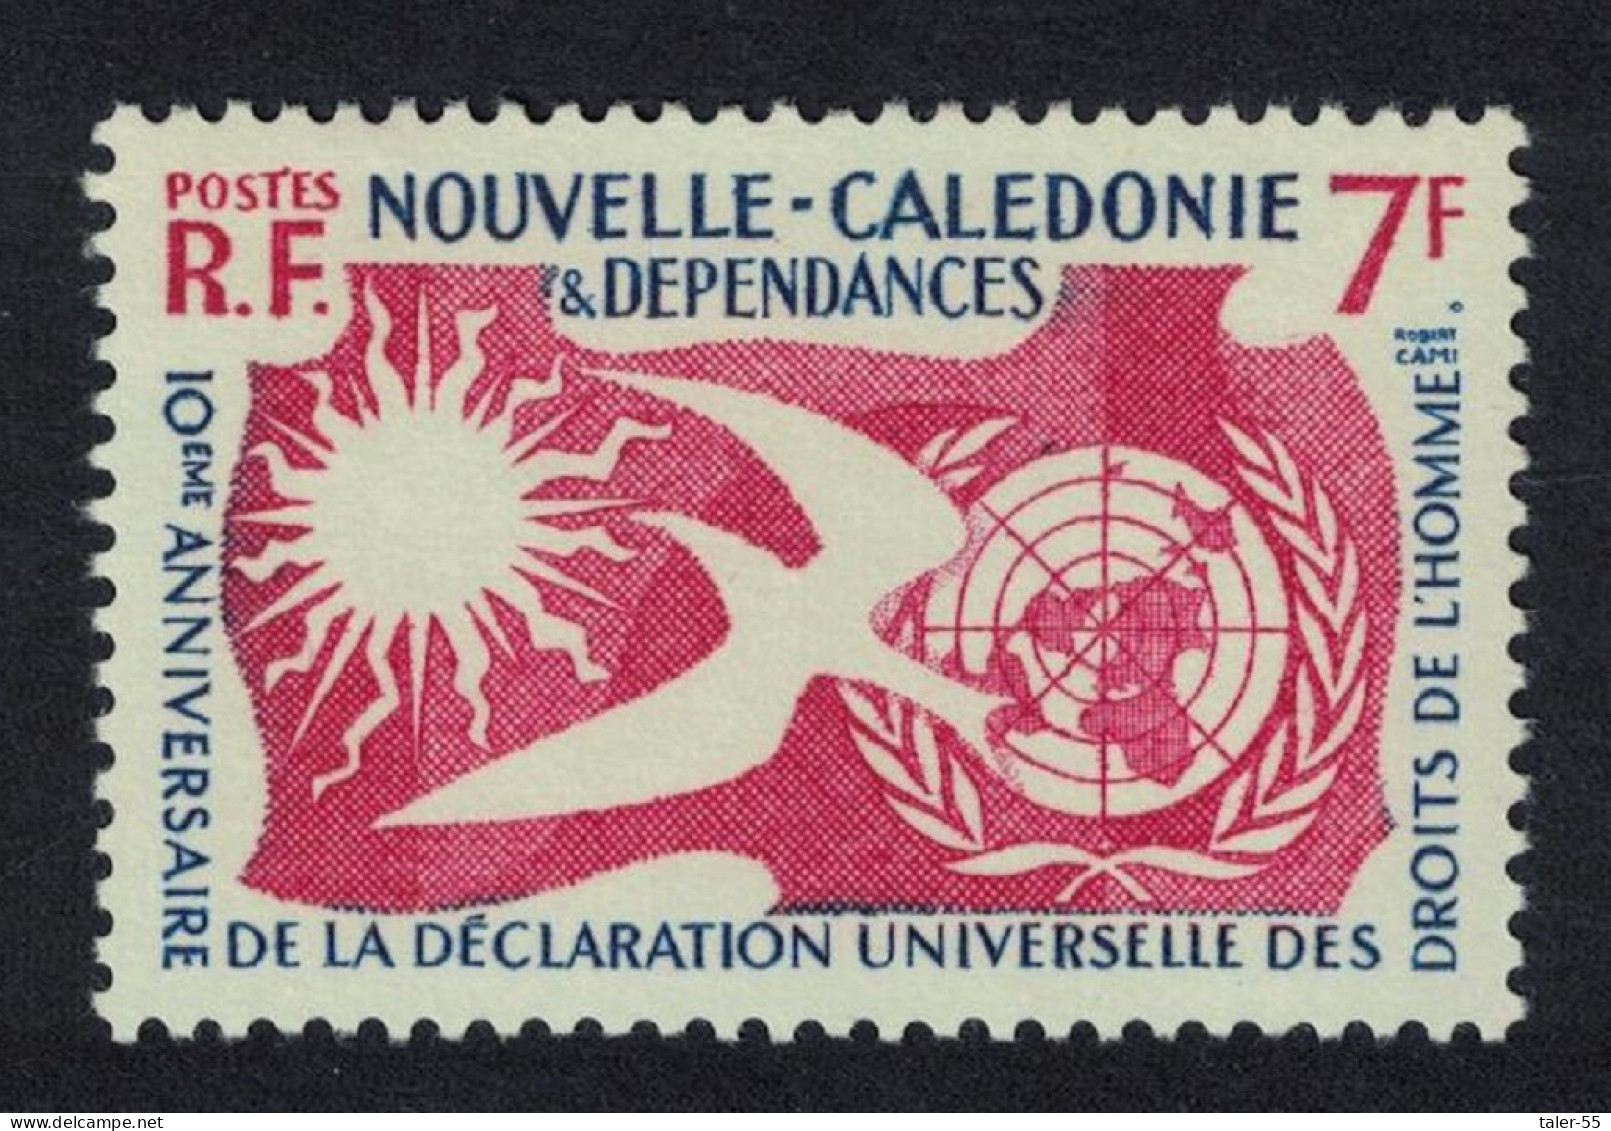 New Caledonia Tenth Anniversary Of Declaration Of Human Rights 1958 MNH SG#343 - Neufs